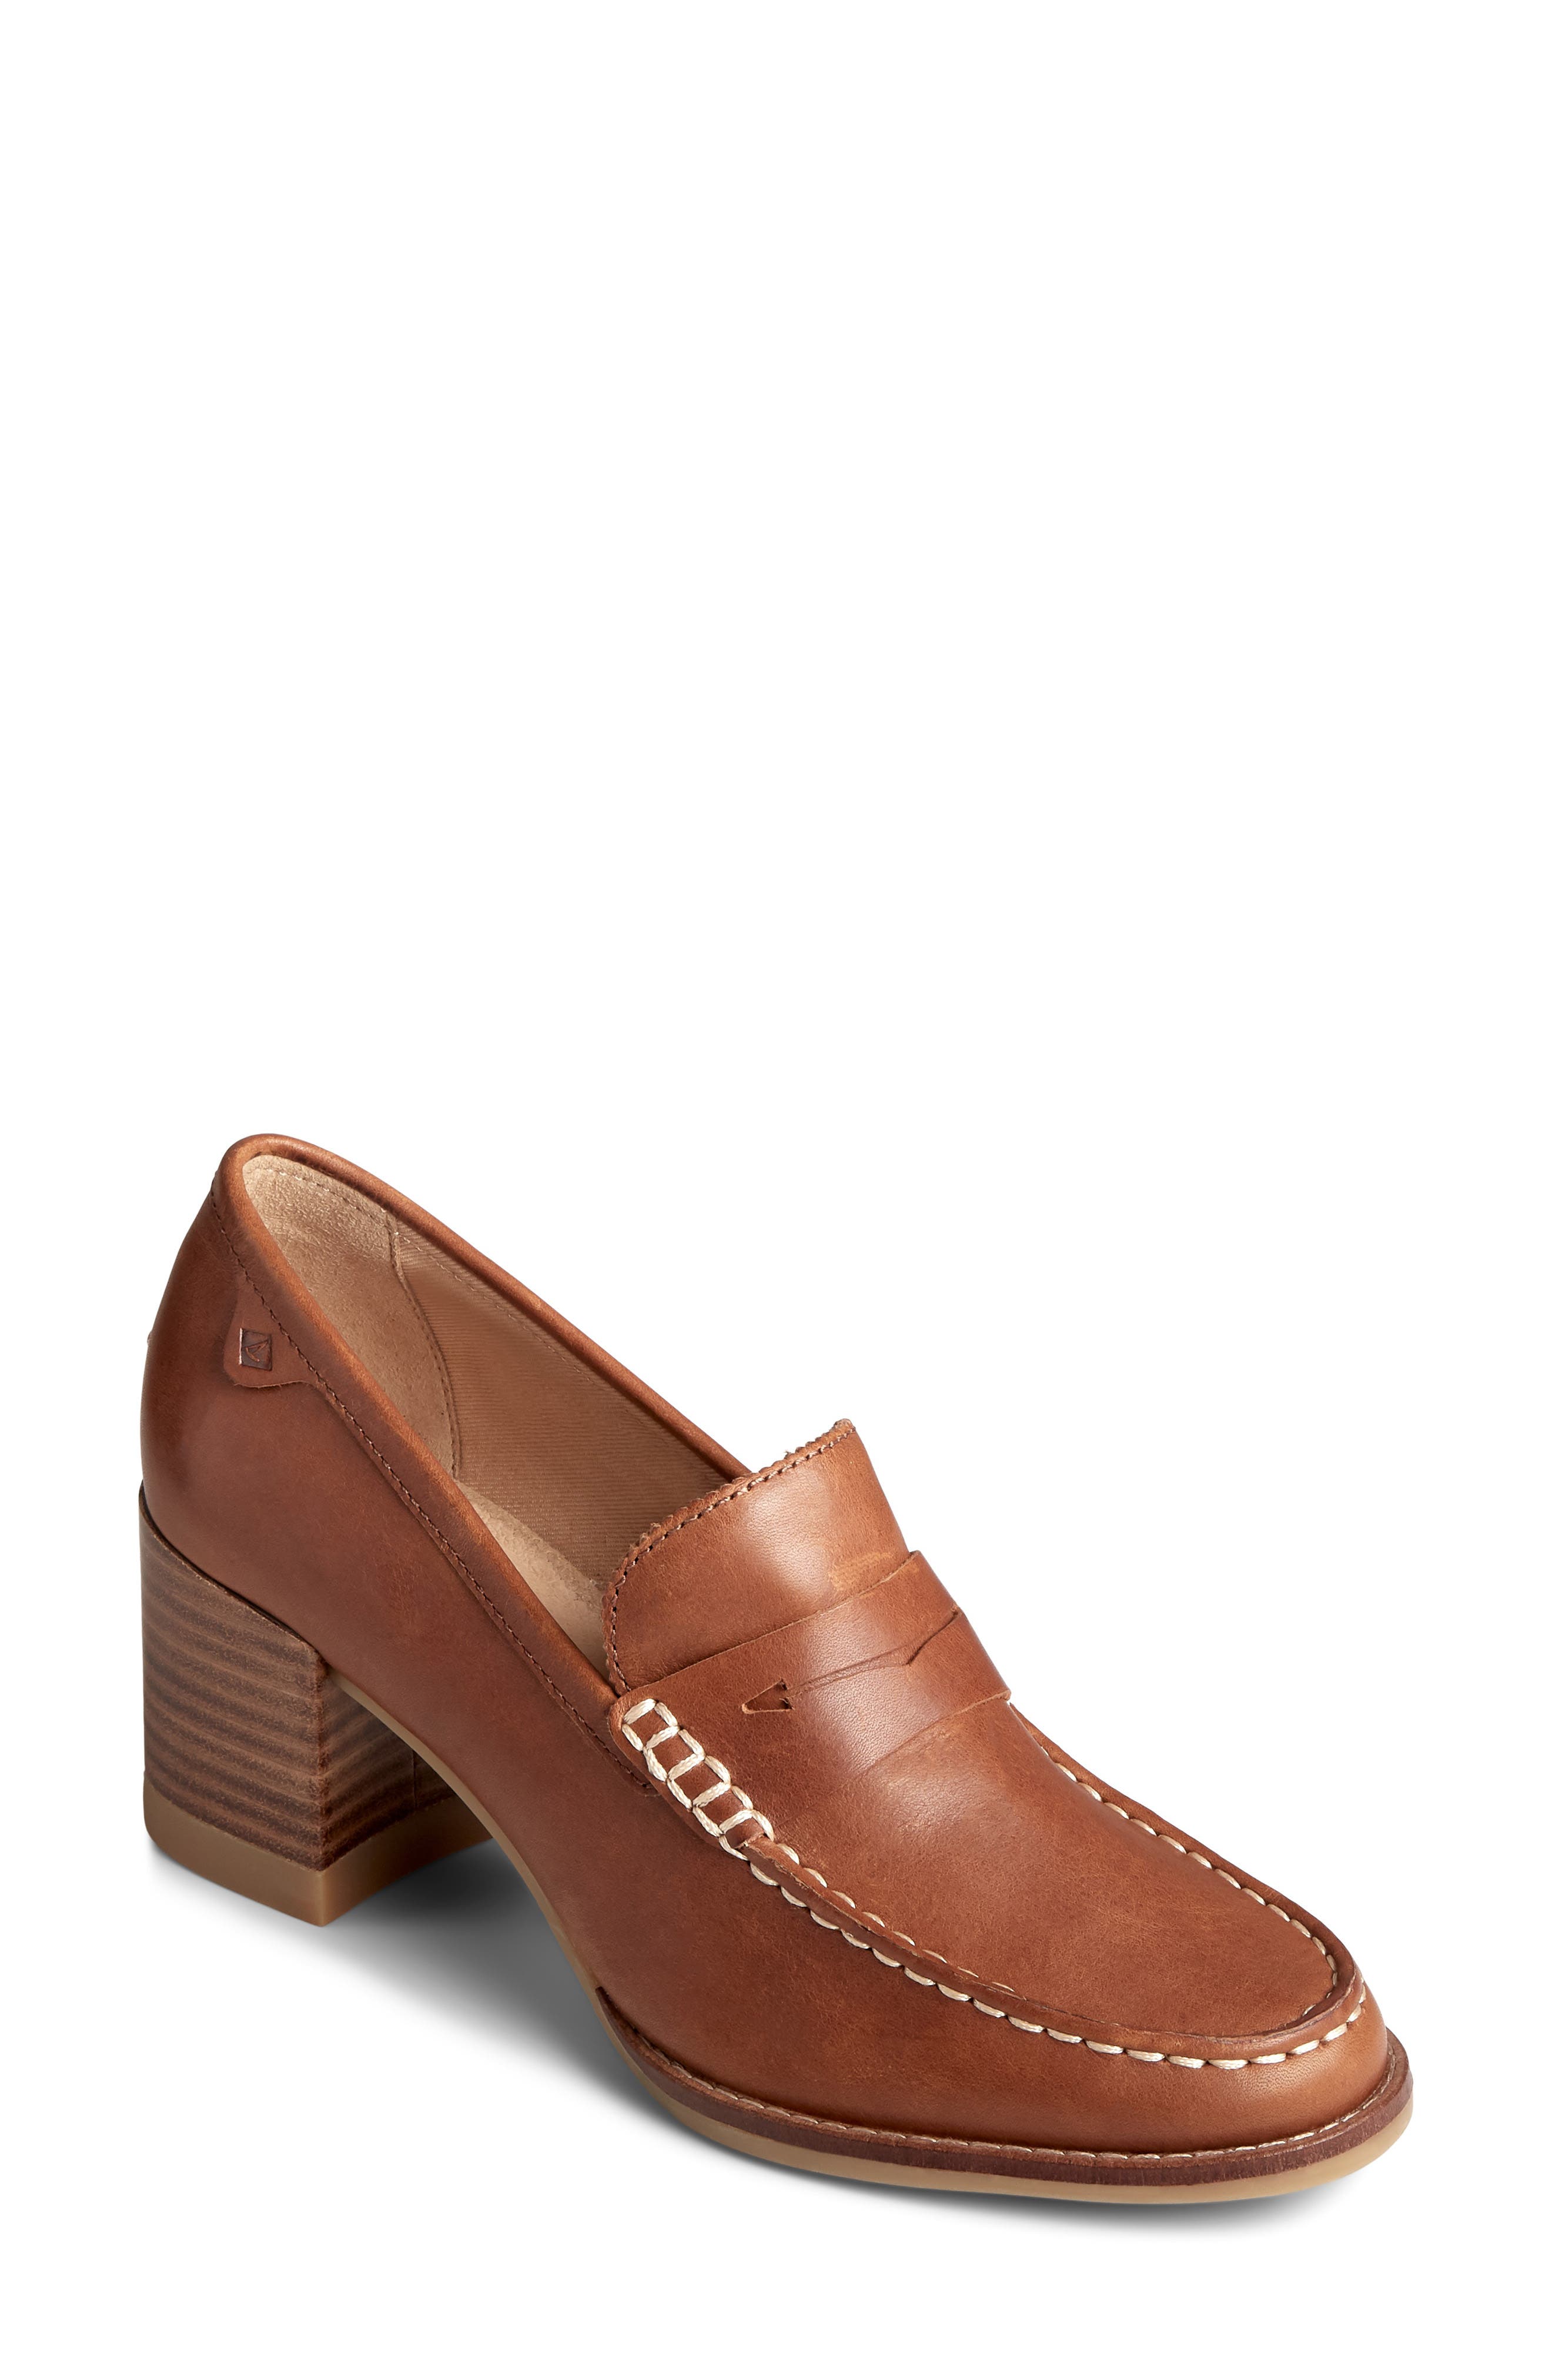 Seaport Penny Loafer Pump